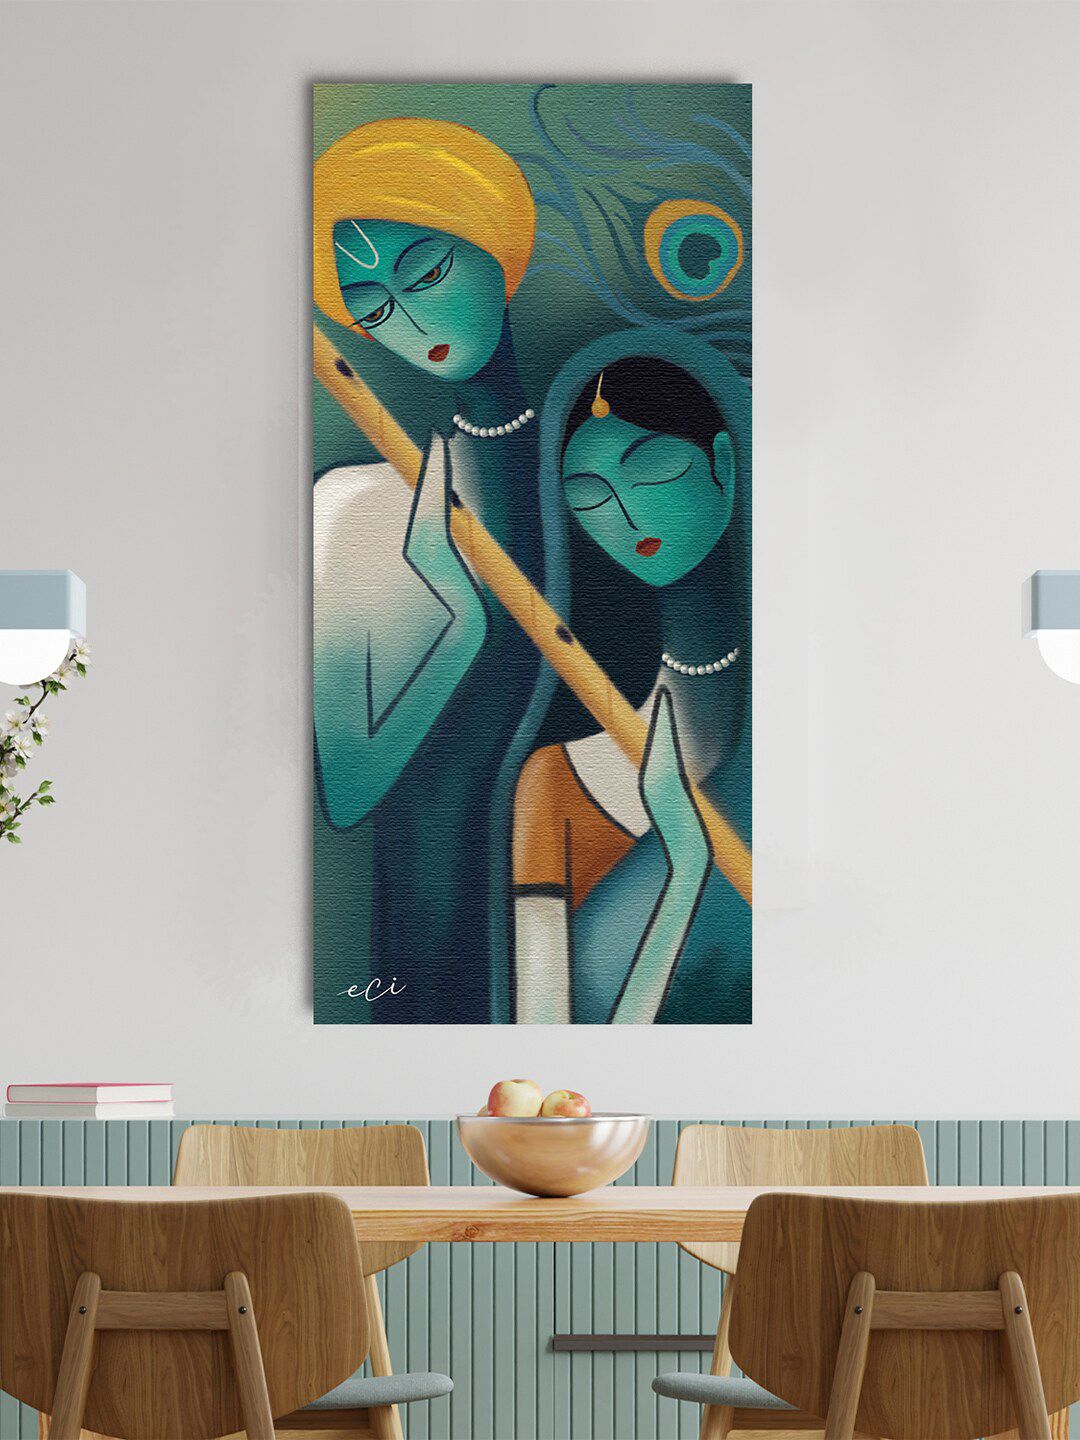 eCraftIndia Teal Blue & Yellow Lord Radha Krishna Abstract Art Original Design Canvas Printed Wall Painting Price in India